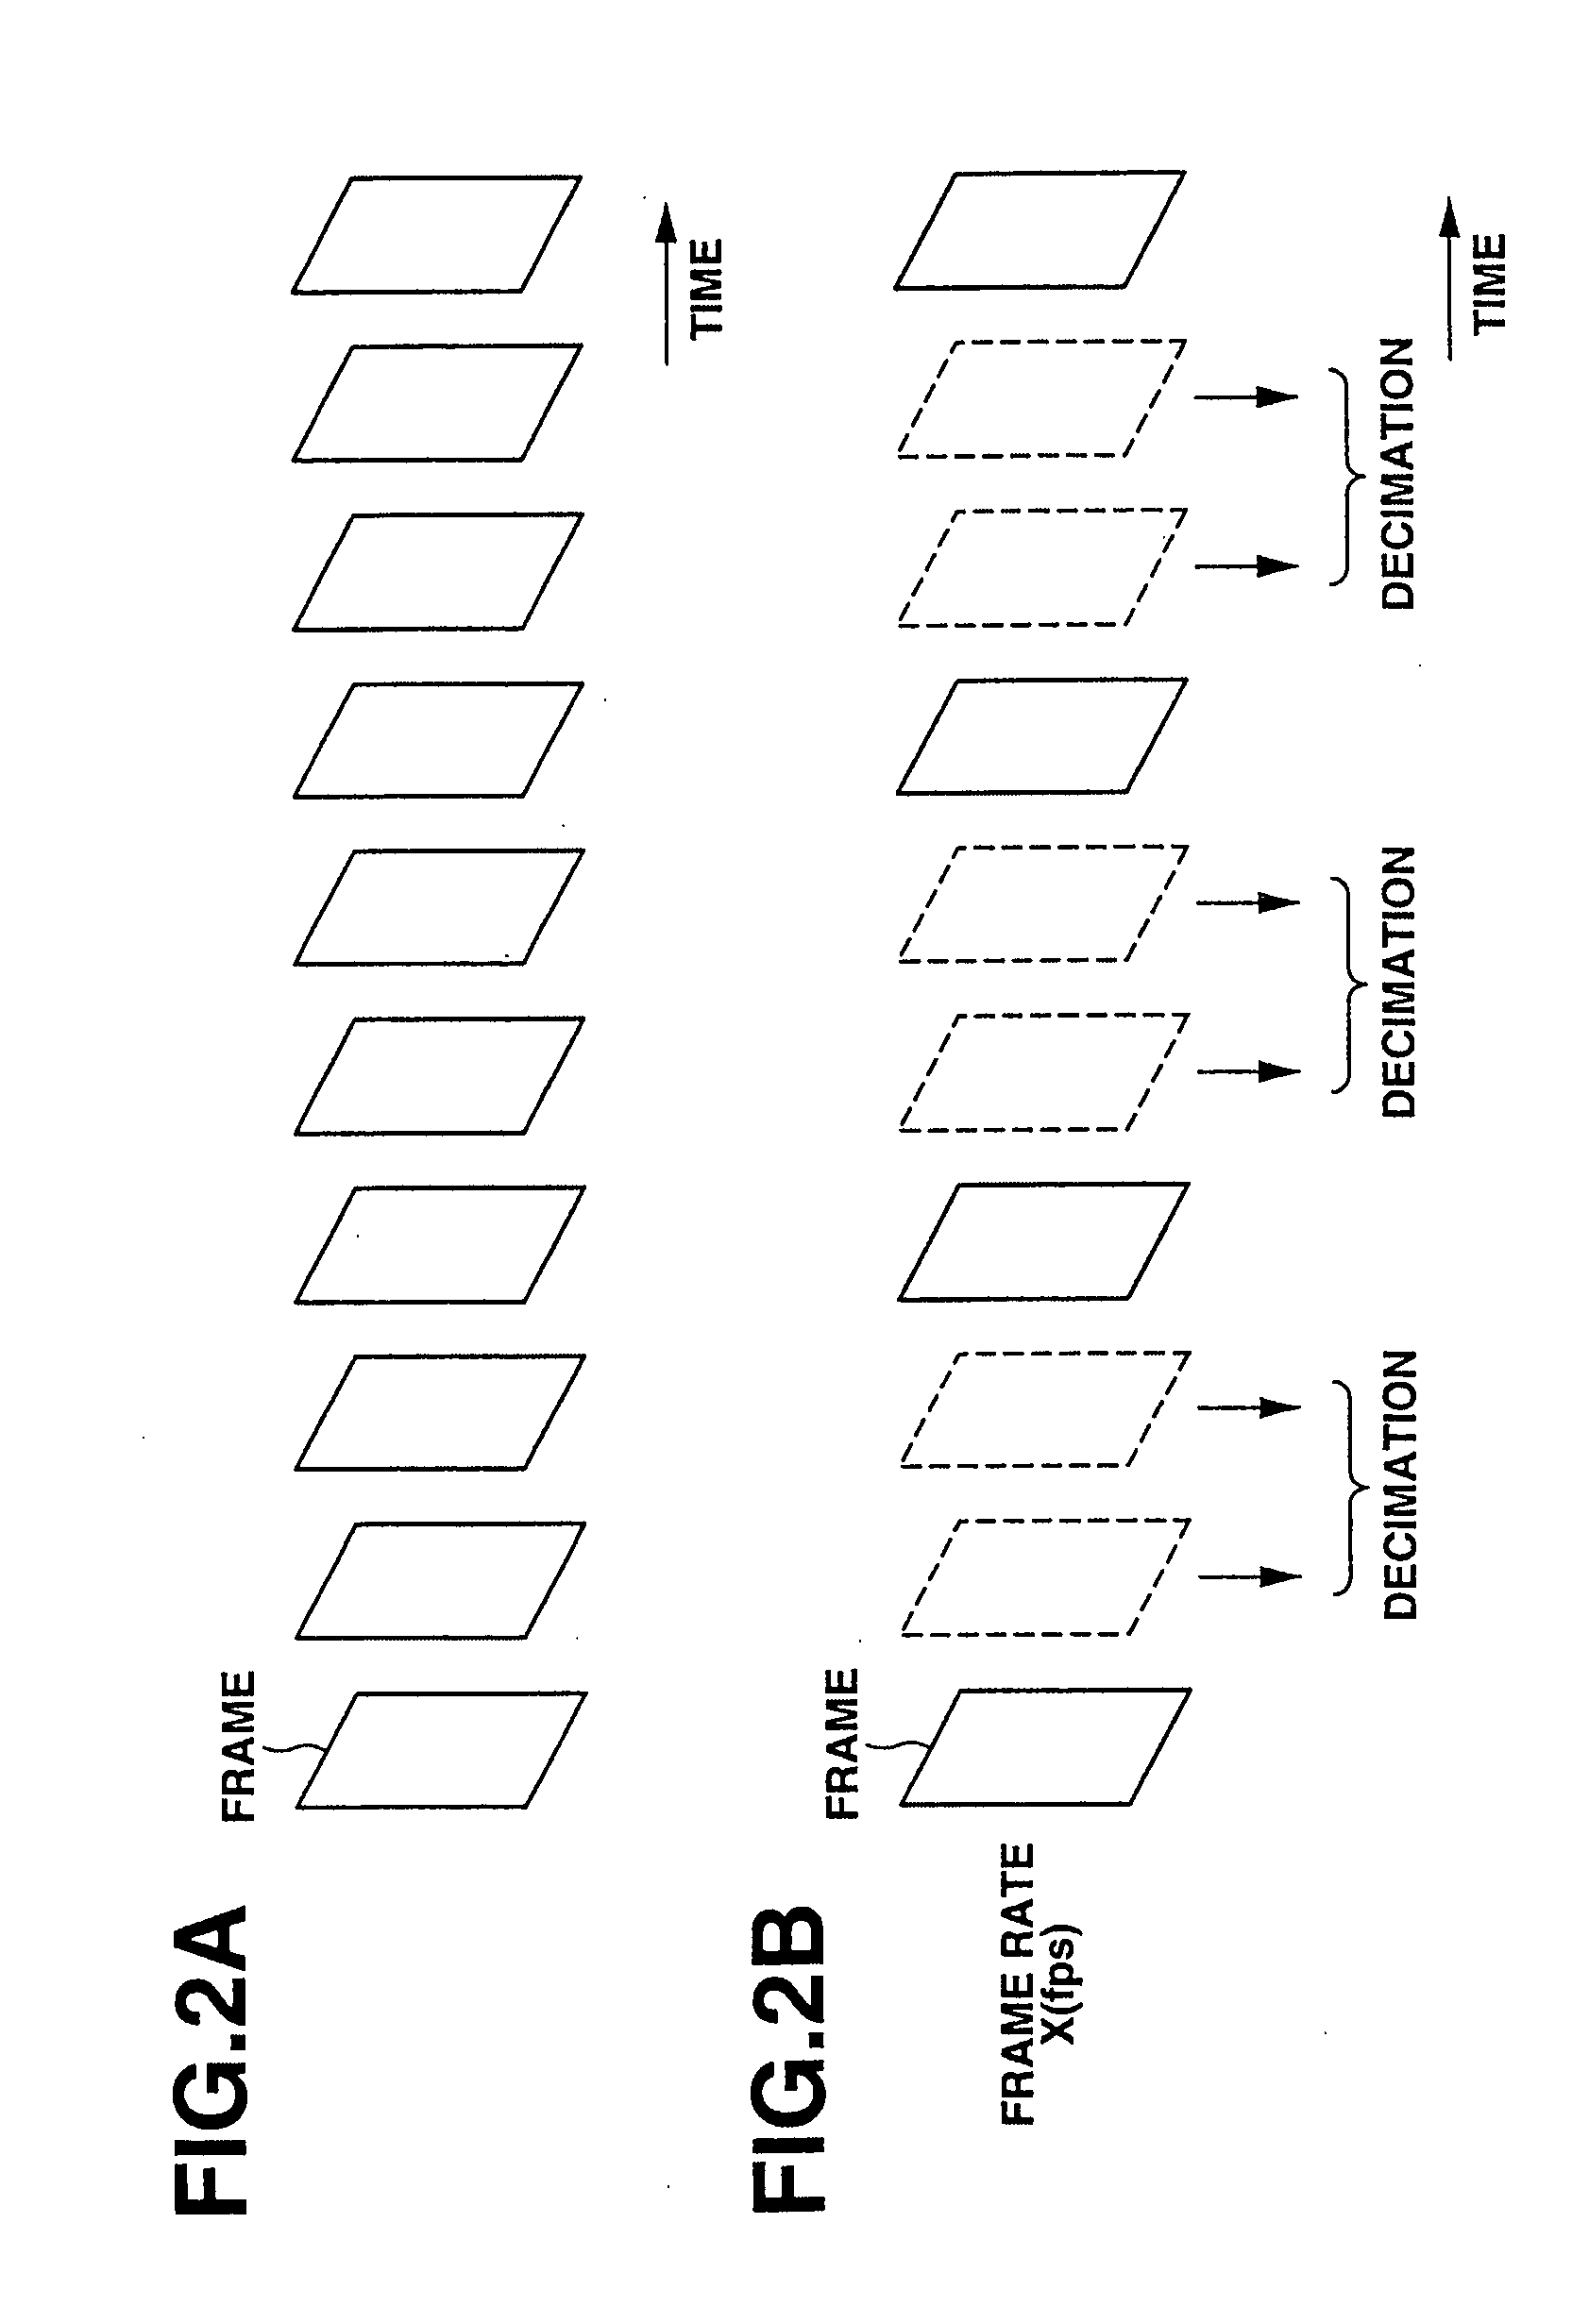 Moving picture encoding apparatus